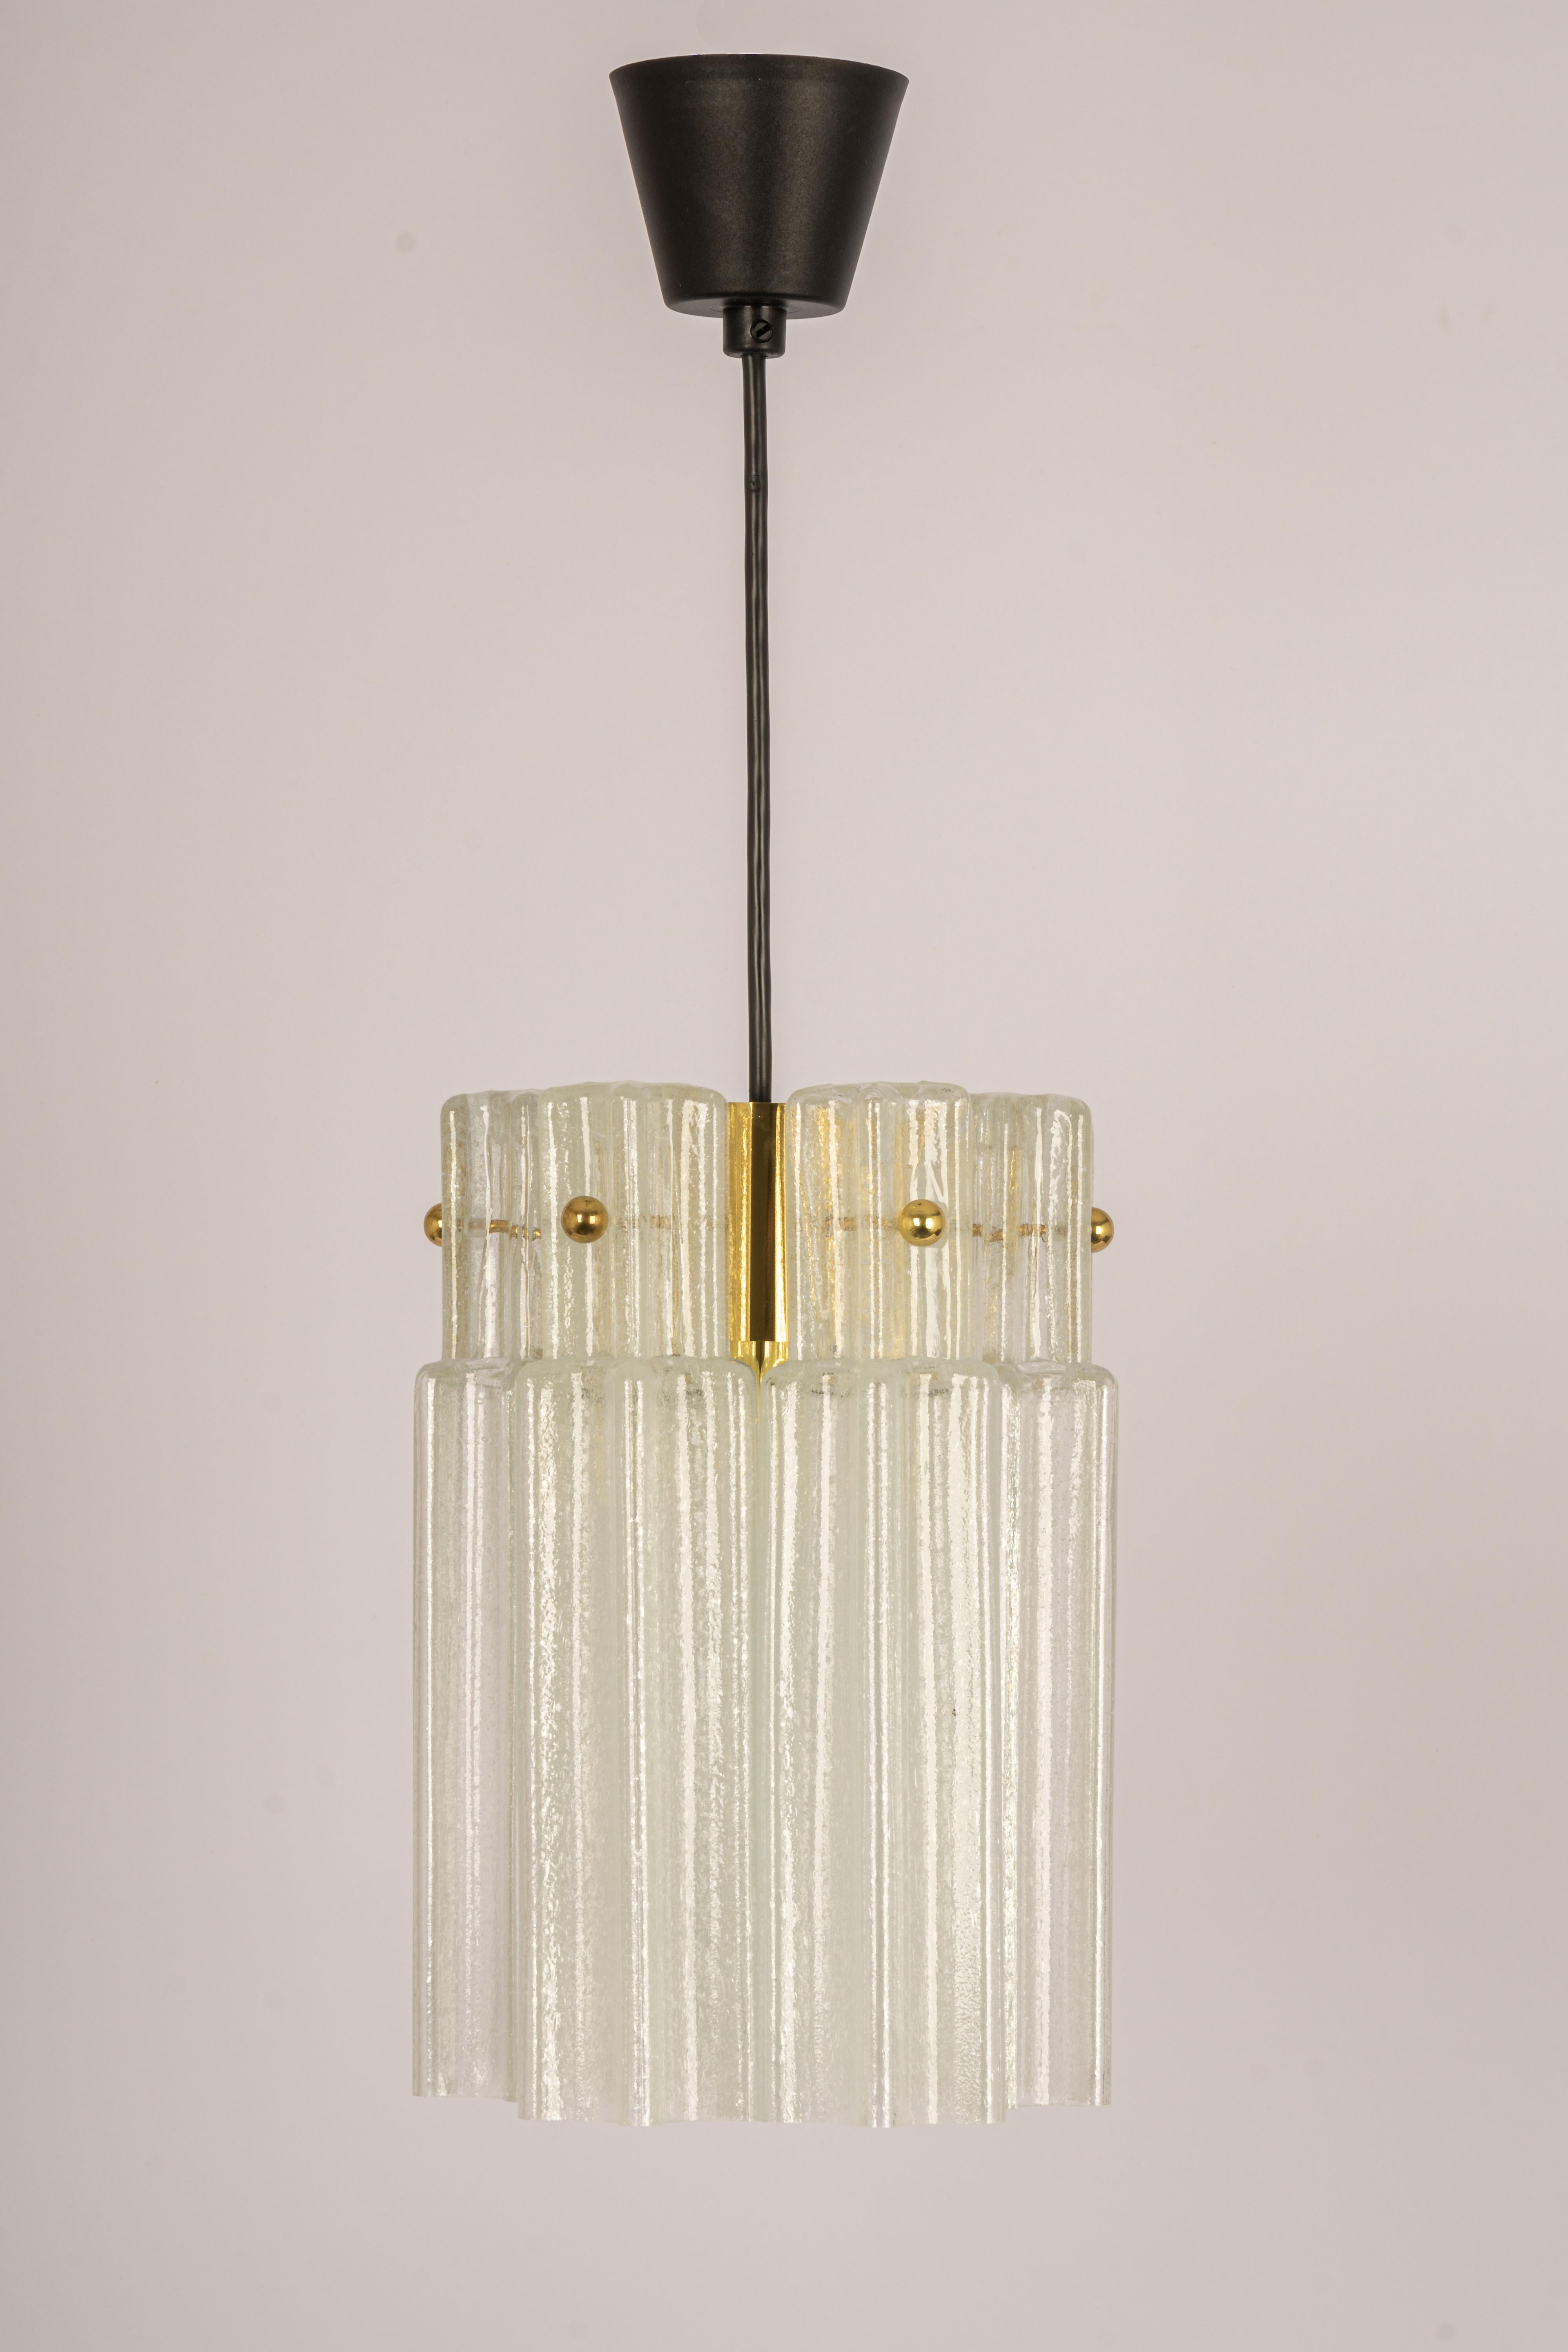 1 of 3 Pendant lights with hand-blown glass pieces on a brass base made by Glashütte Limburg.

Best of the 1970s from Germany.
High quality and in very good condition. Cleaned, well-wired, and ready to use. 

The fixture requires 1 x E27